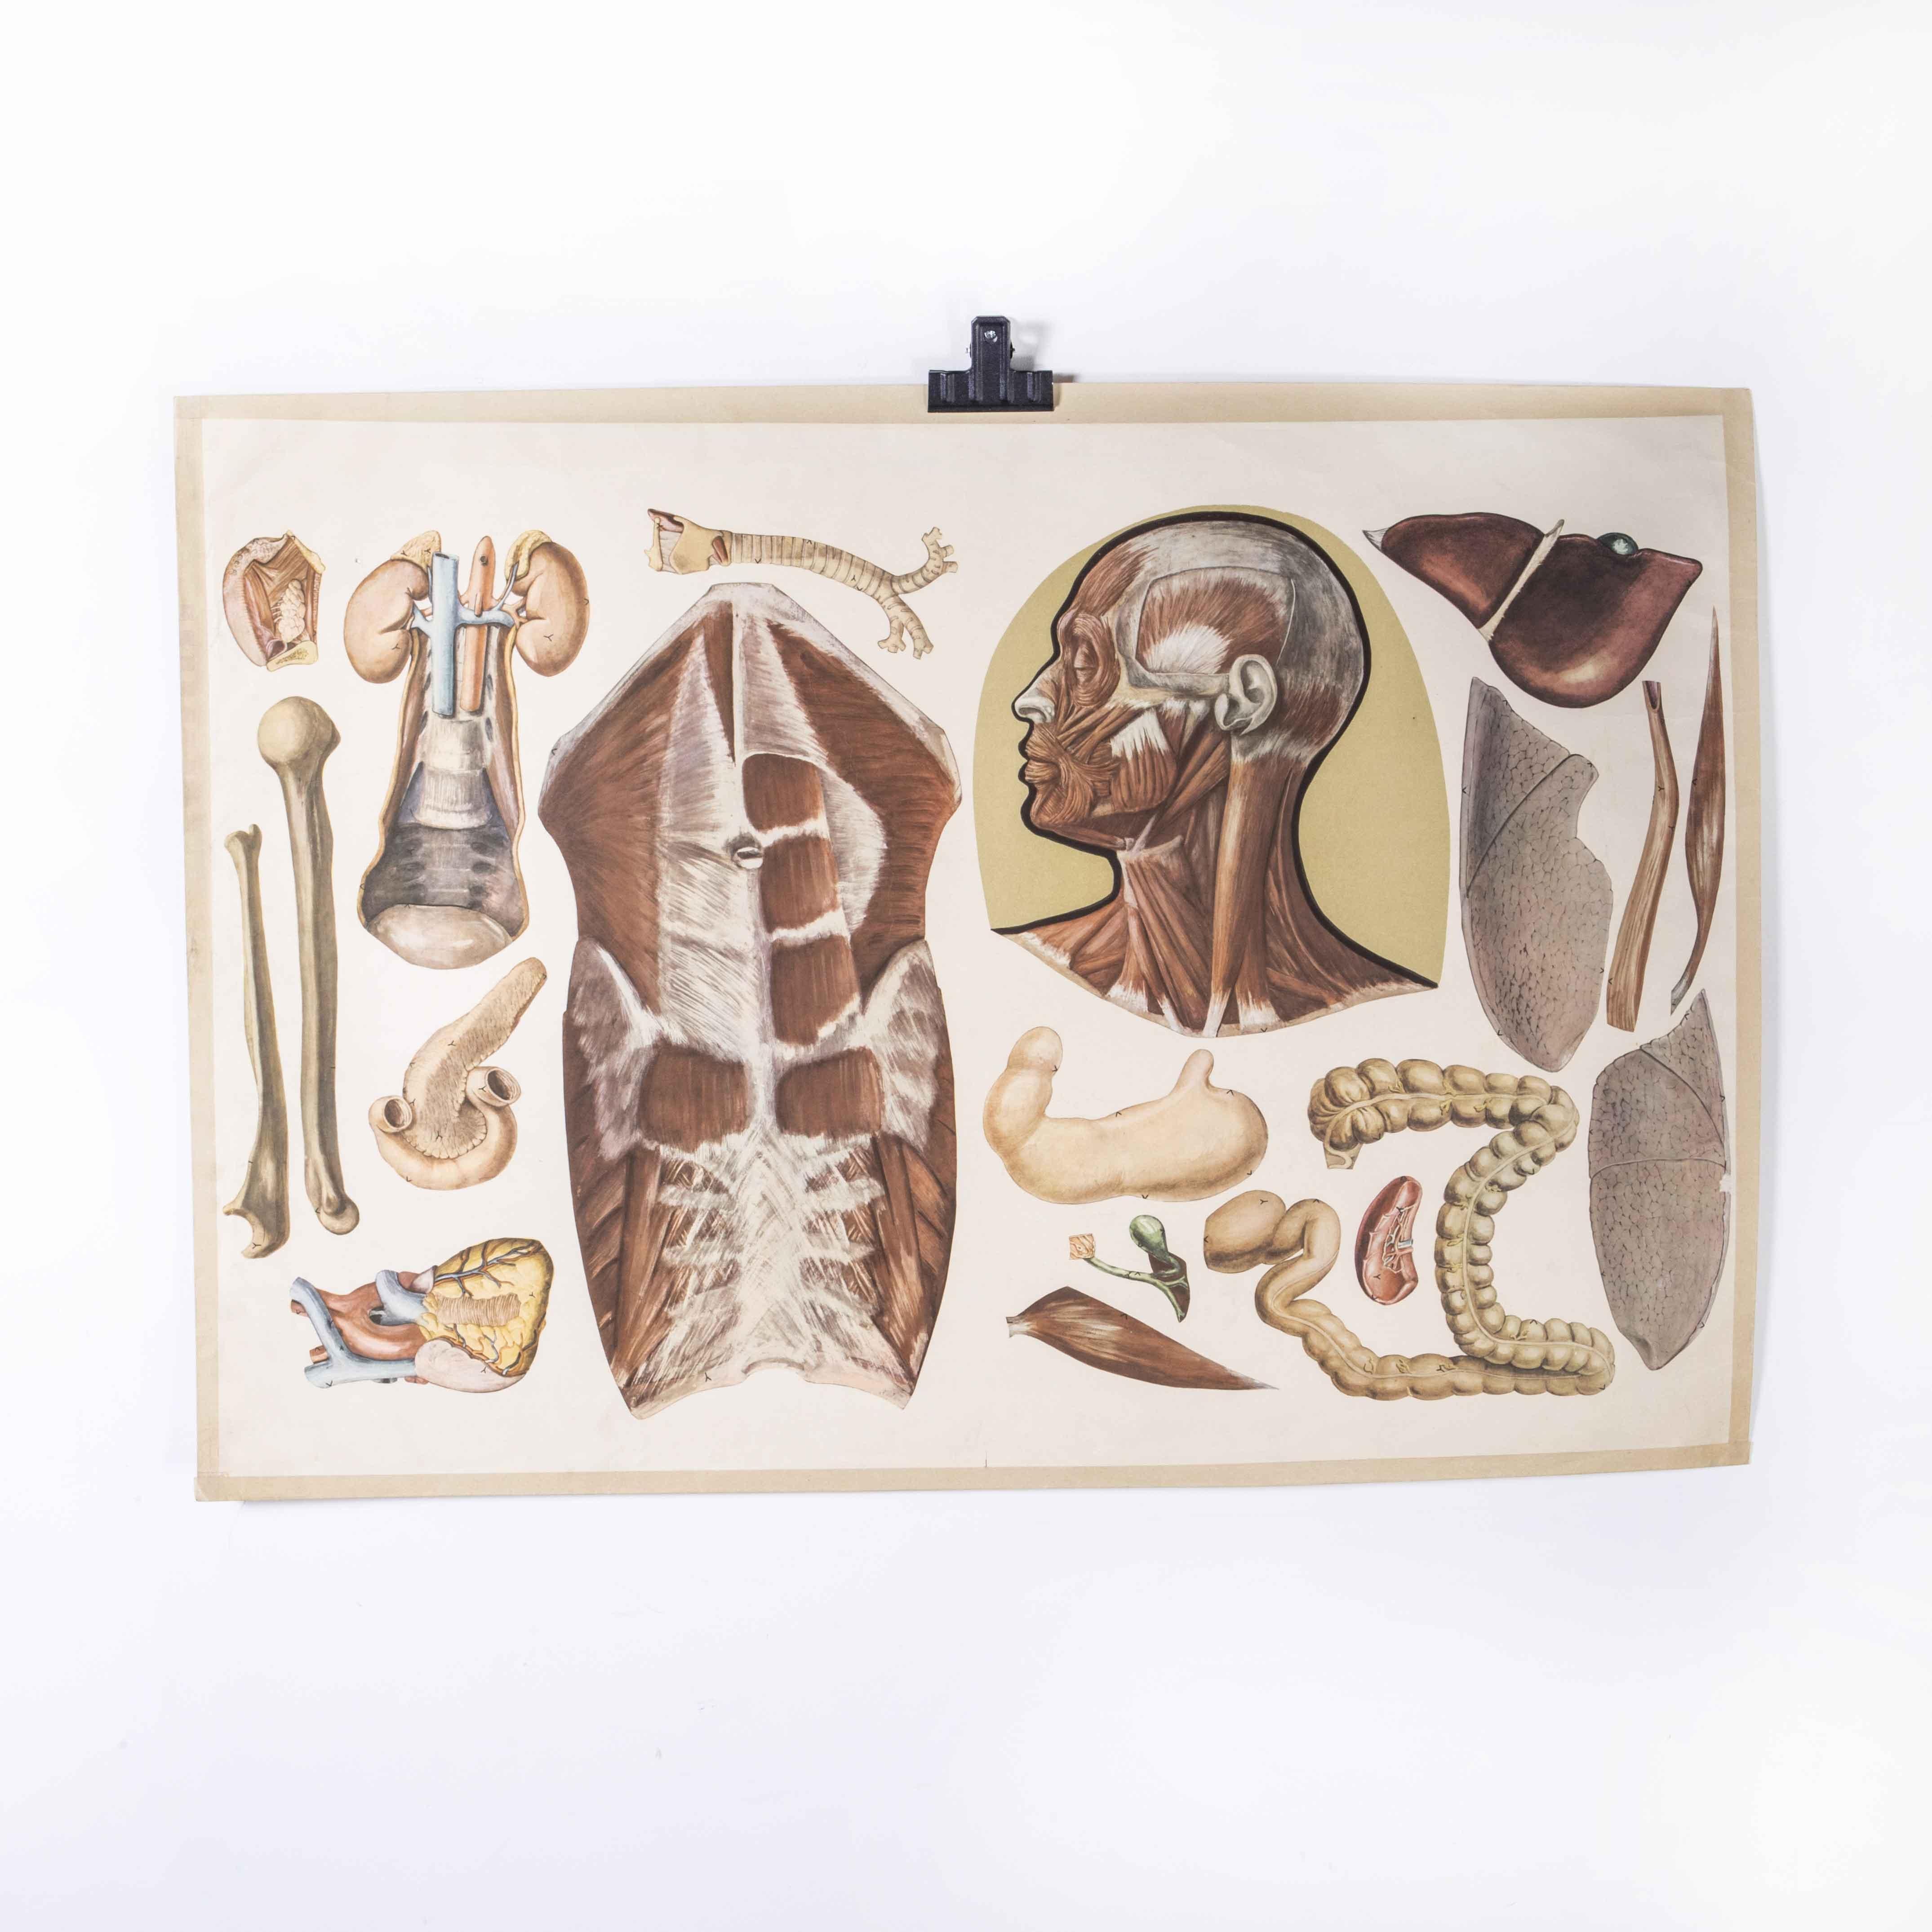 Early 20th Century Human Skeleton Educational Poster
Early 20th Century Human Skeleton Educational Poster. Early 20th century Czechoslovakian educational human anatomy chart. A rare and vintage wall chart from the Czech Republic illustrating the